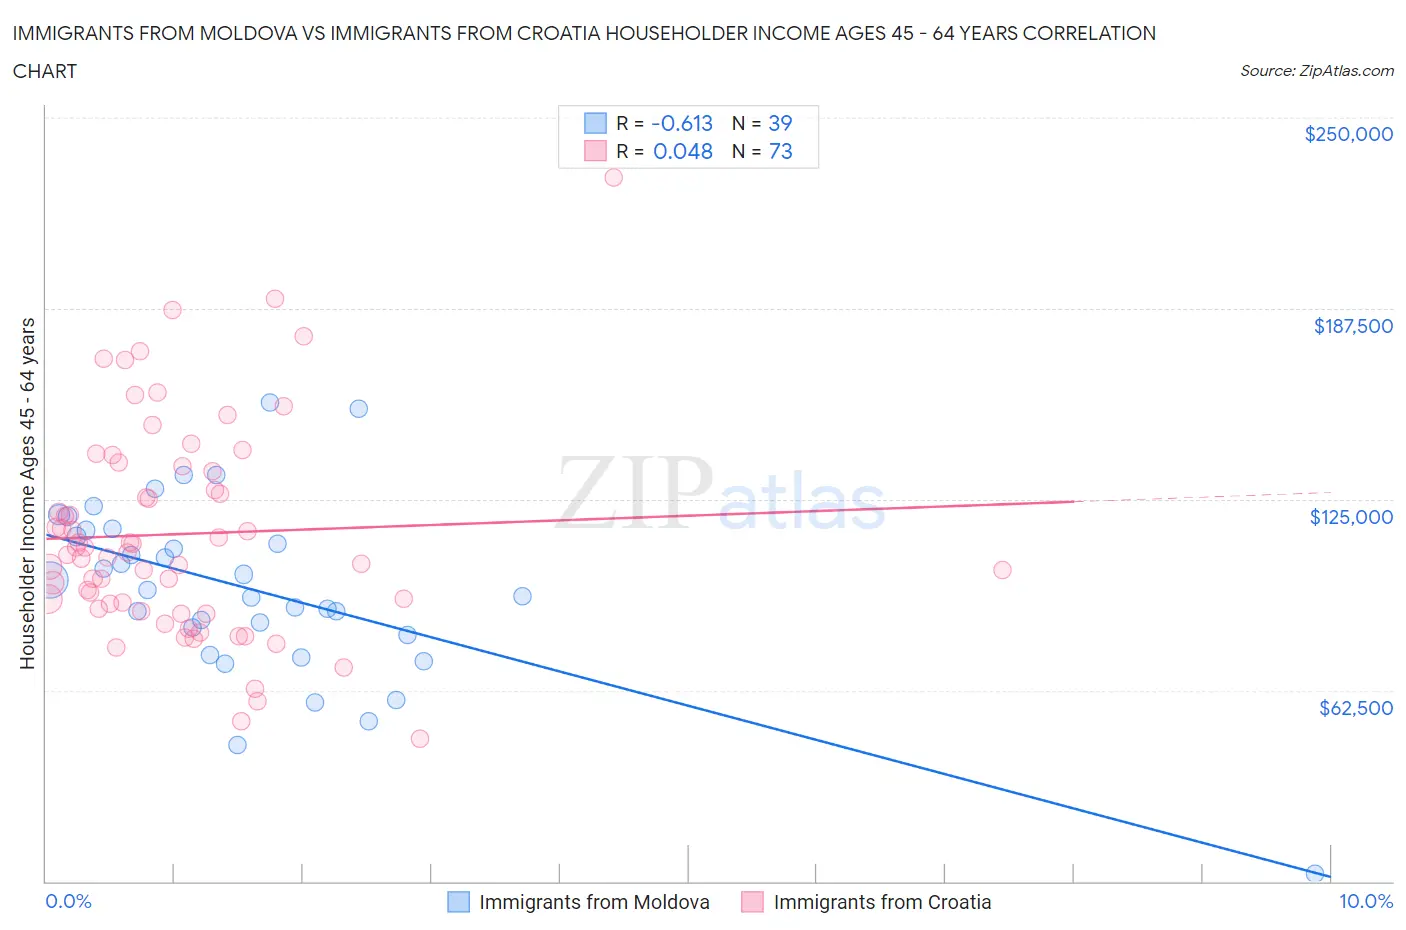 Immigrants from Moldova vs Immigrants from Croatia Householder Income Ages 45 - 64 years